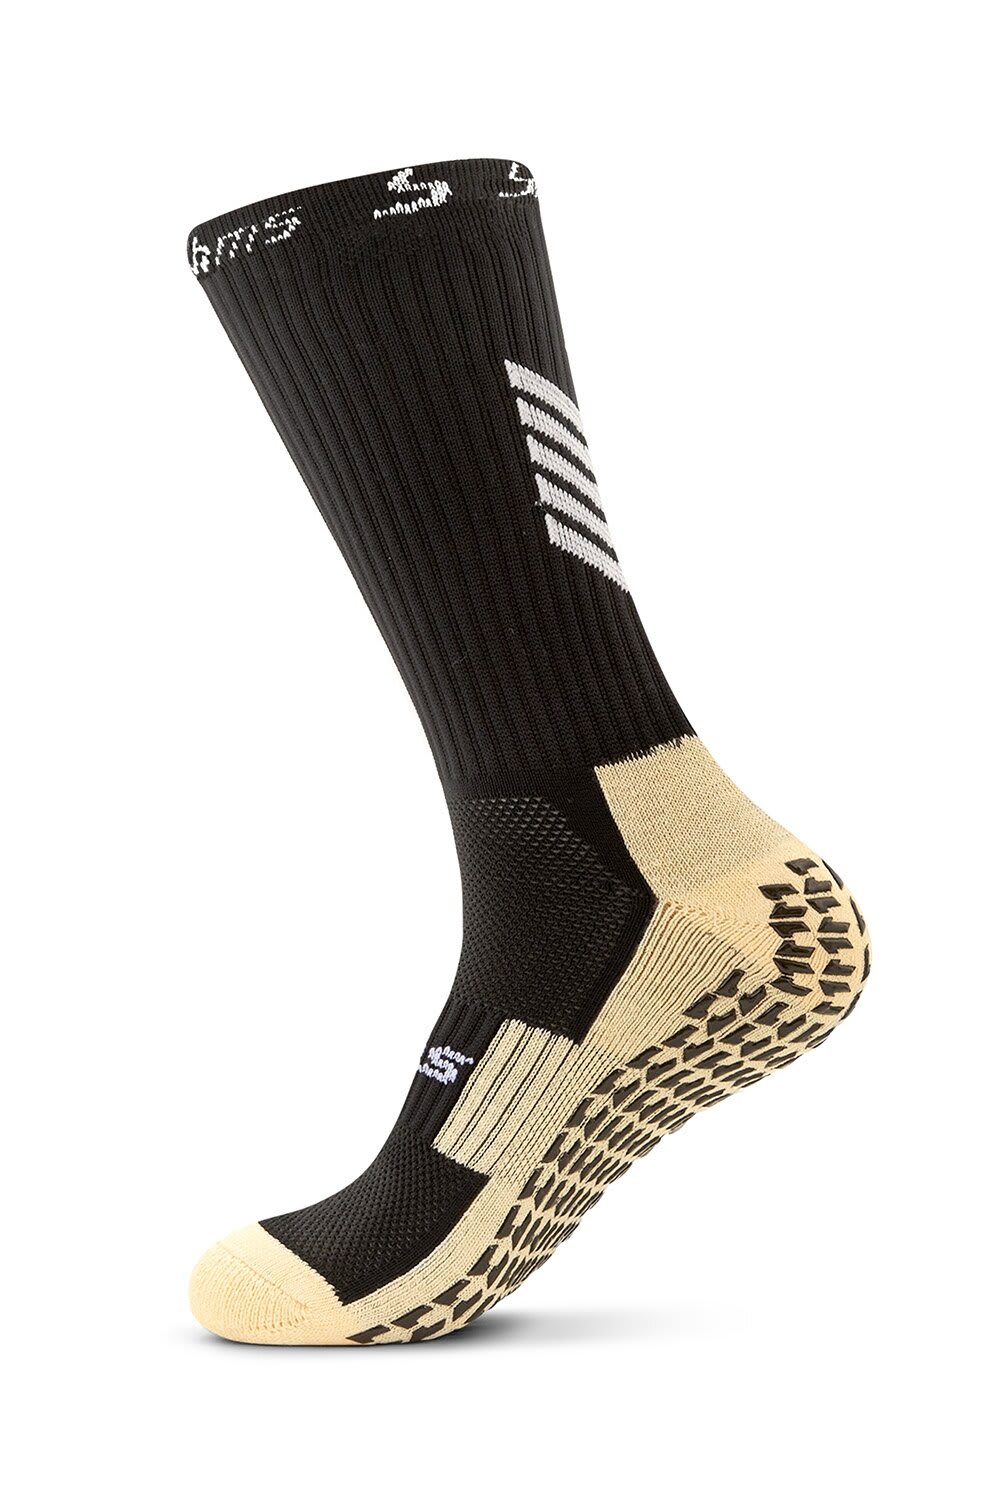 White Grip Socks For Athletes - Shop Our Collection - Botthms